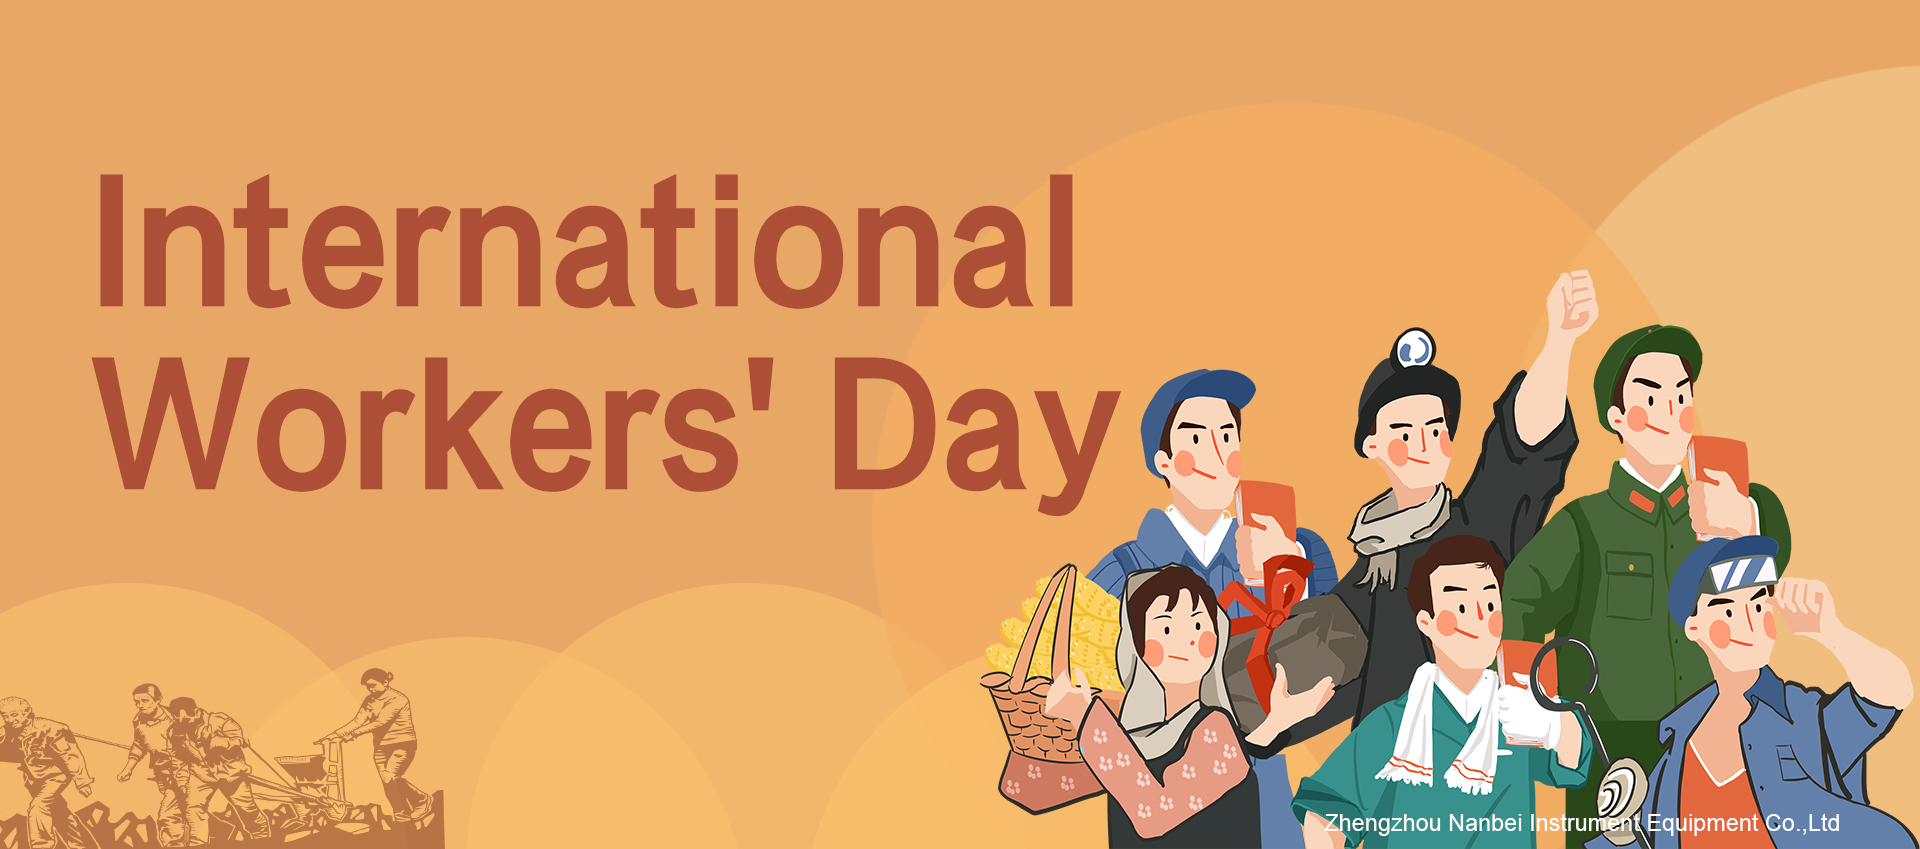 International Workers' Day